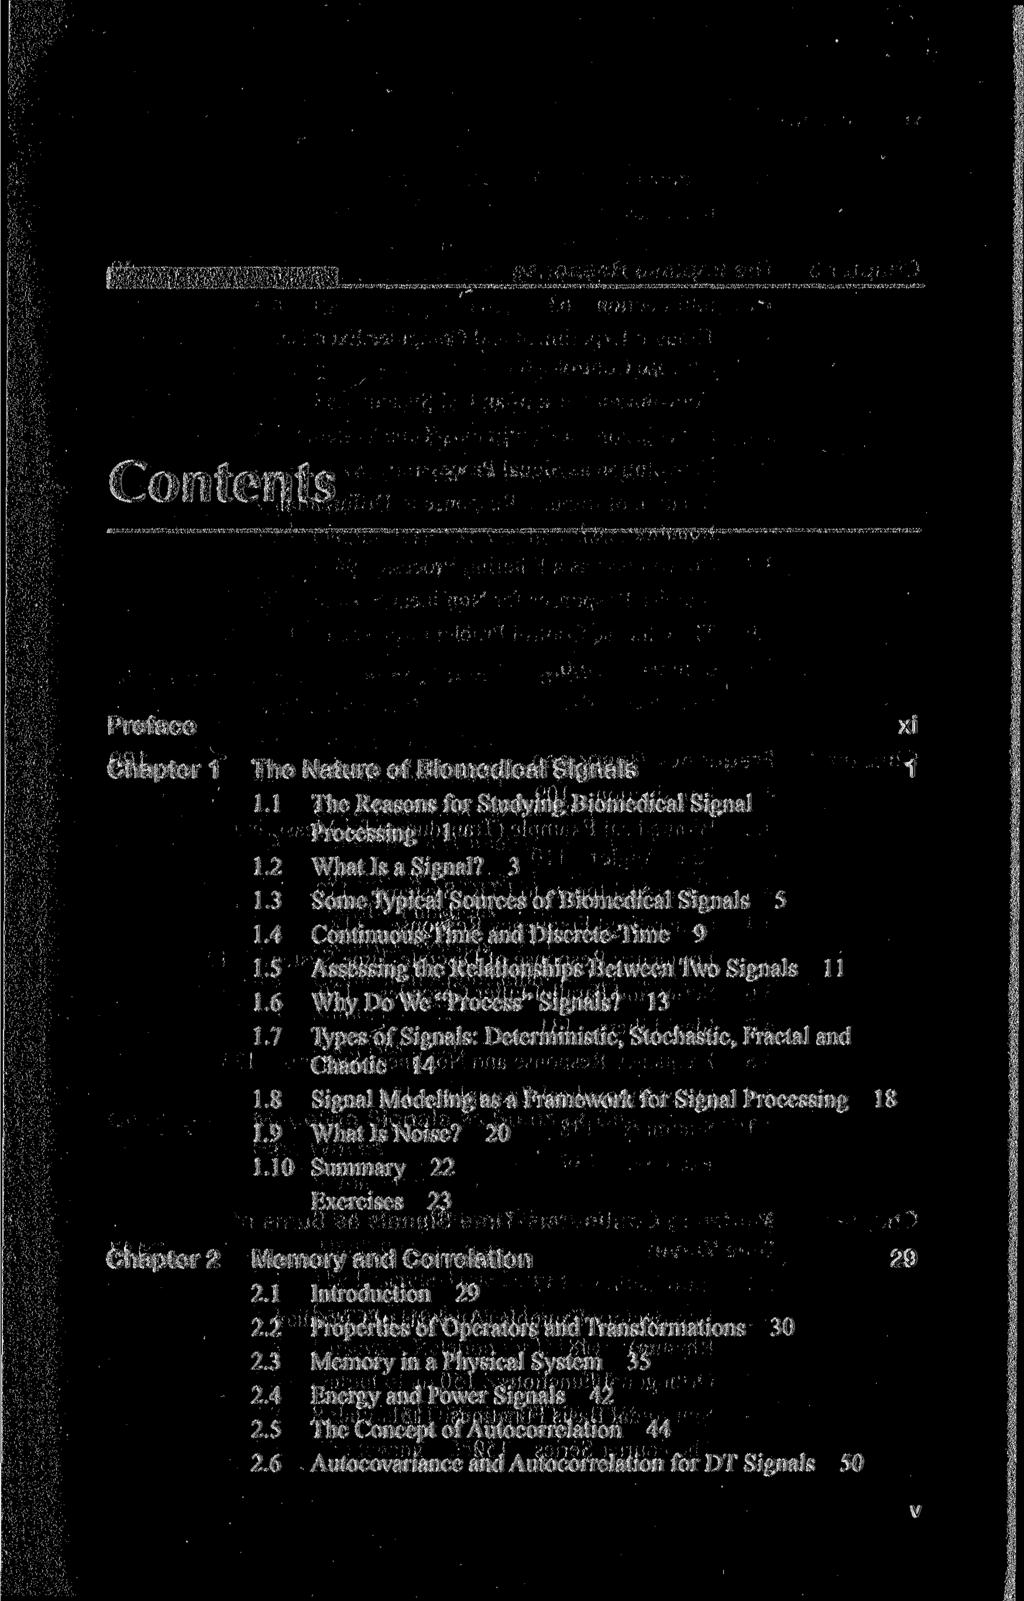 Contents Preface Chapter 1 The Nature of Biomedical Signals 1 1.1 The Reasons for Studying Biomedical Signal Processing 1 1.2 What Is a Signal? 3 1.3 Some Typical Sources of Biomedical Signals 5 1.